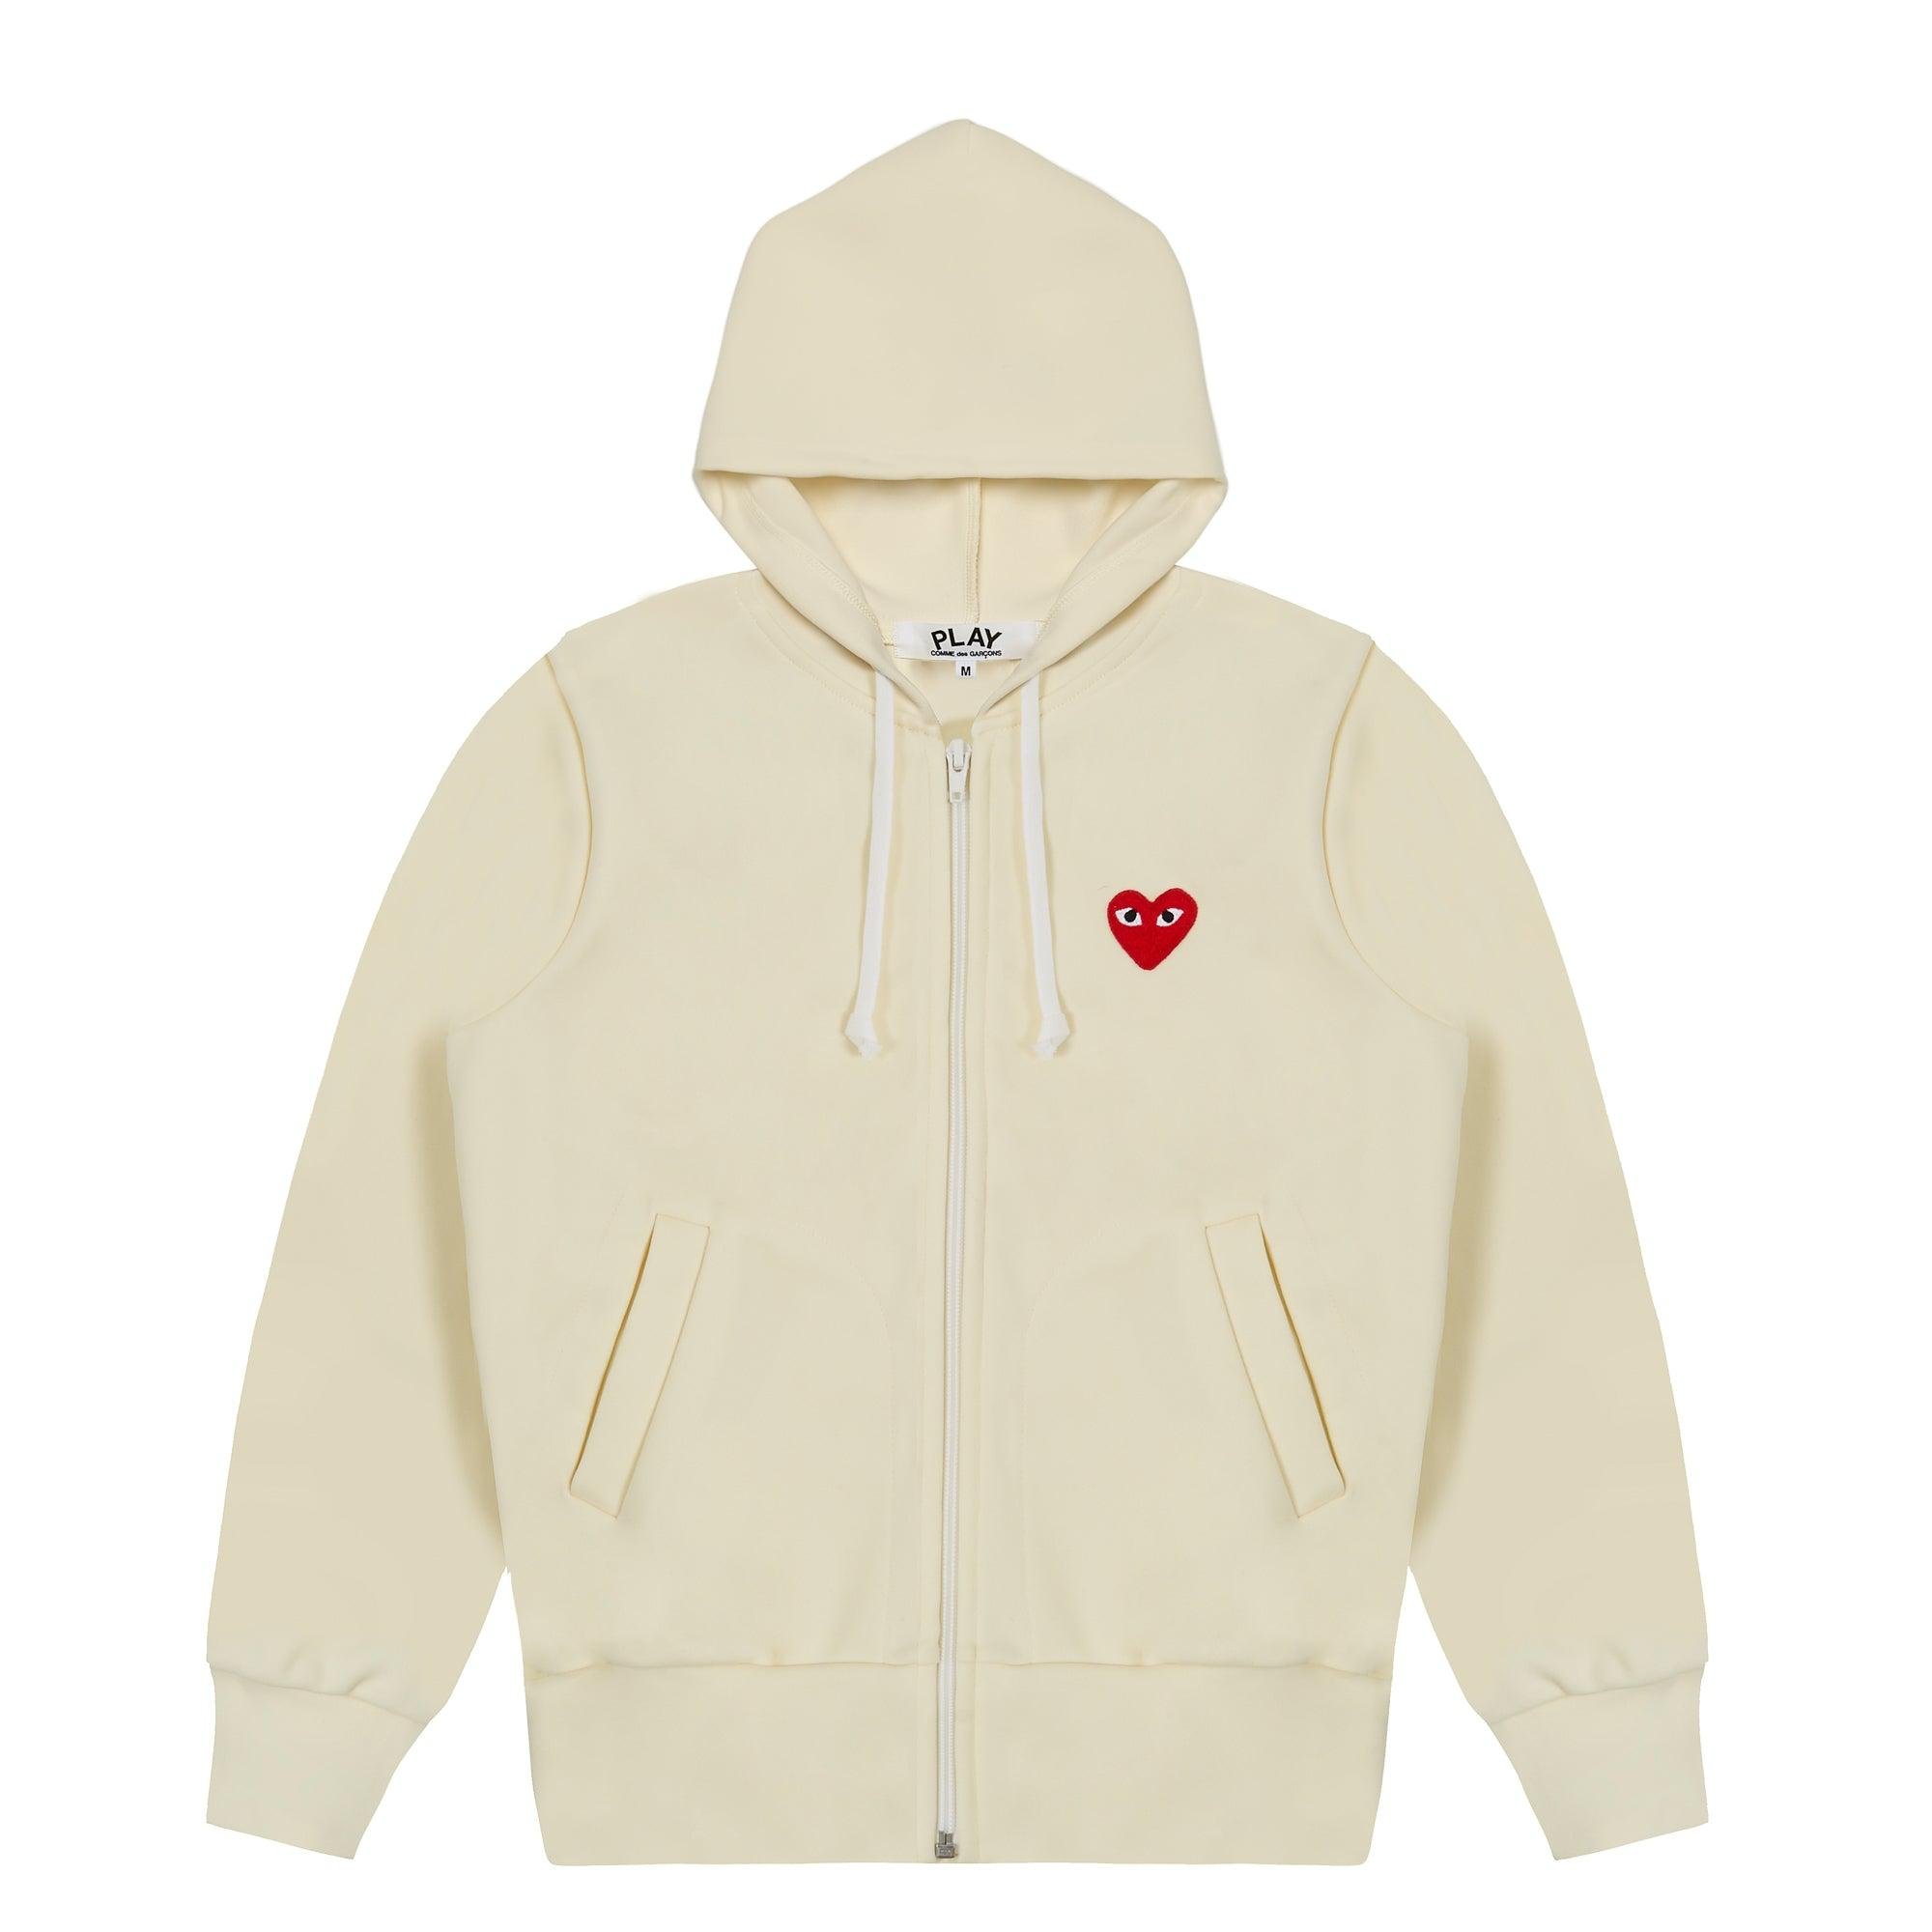 Play Comme des Garçons - Hooded Zip-Up - (Ivory) by COMME DES GARCONS